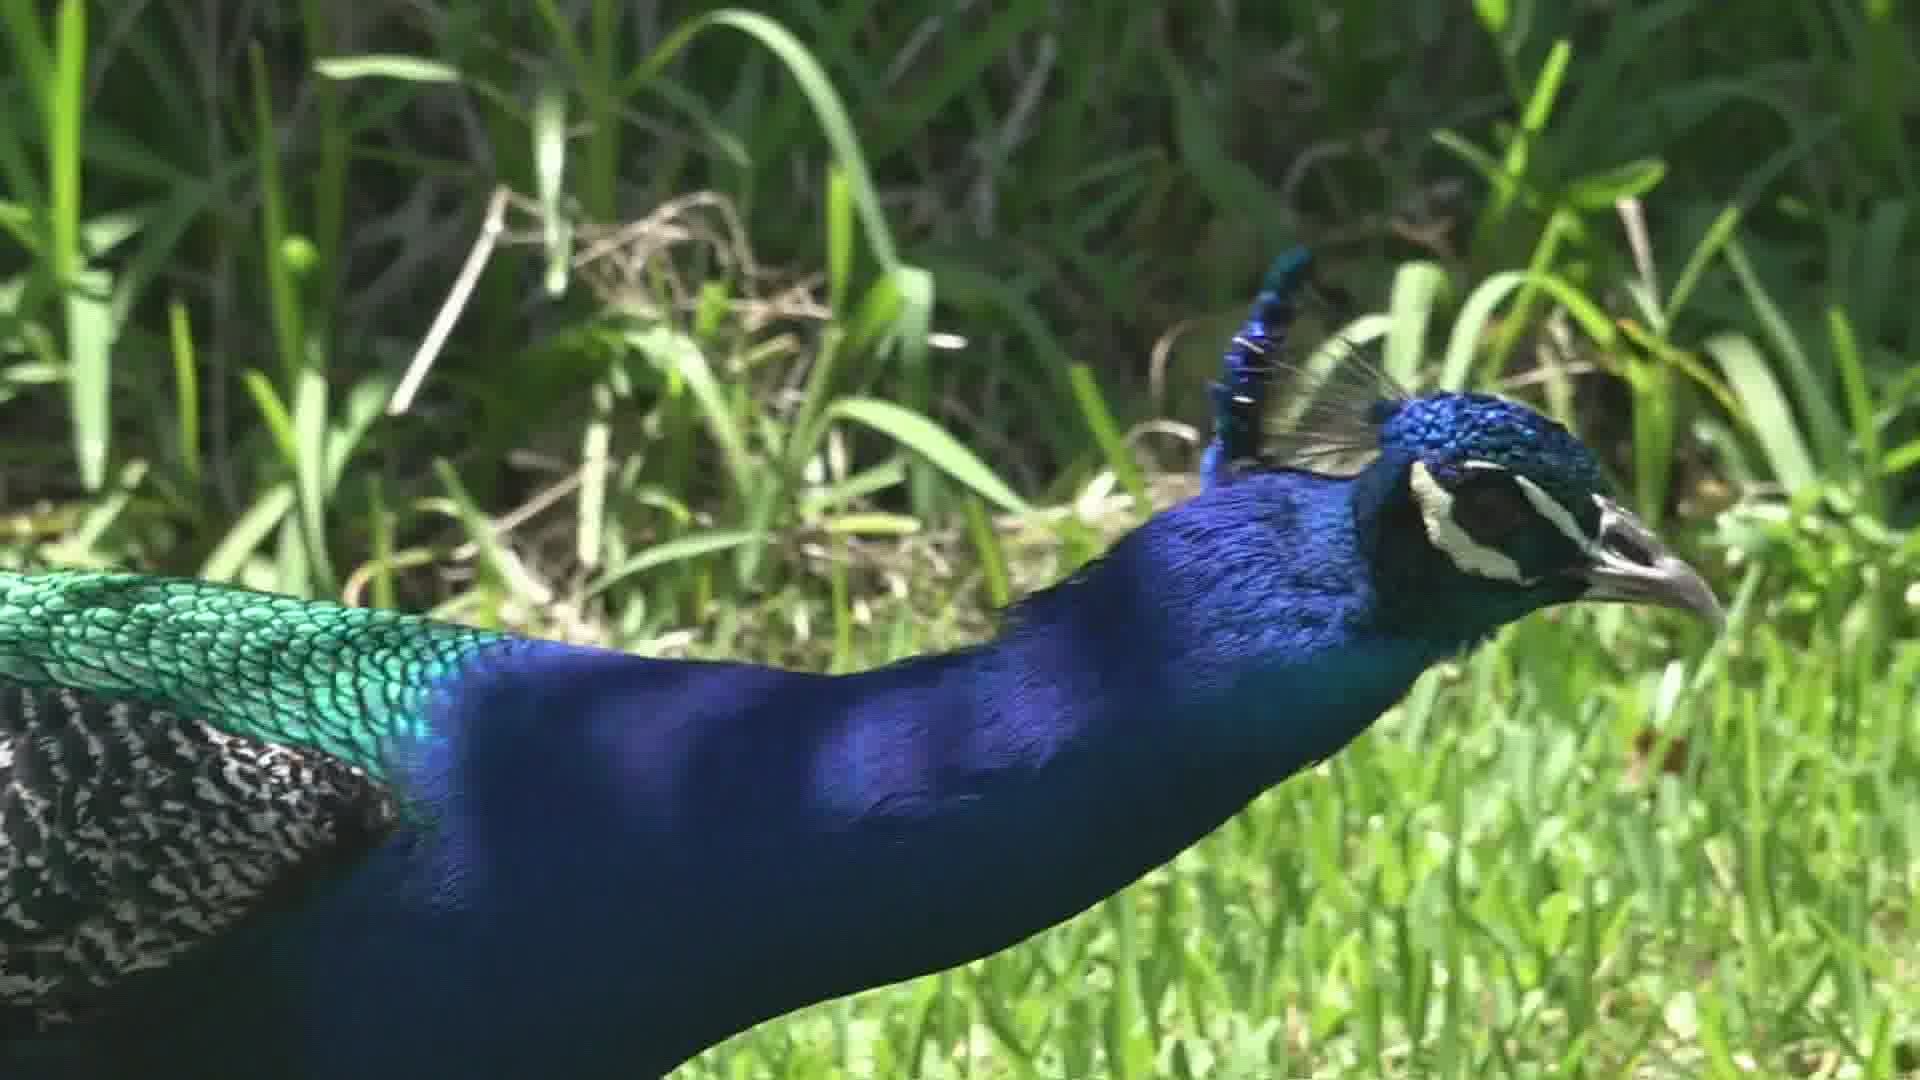 "He's just beautiful," said Carolyn Savage who is new to New Orleans and the neighborhood. "I said this is truly New Orleans when you see a peacock."